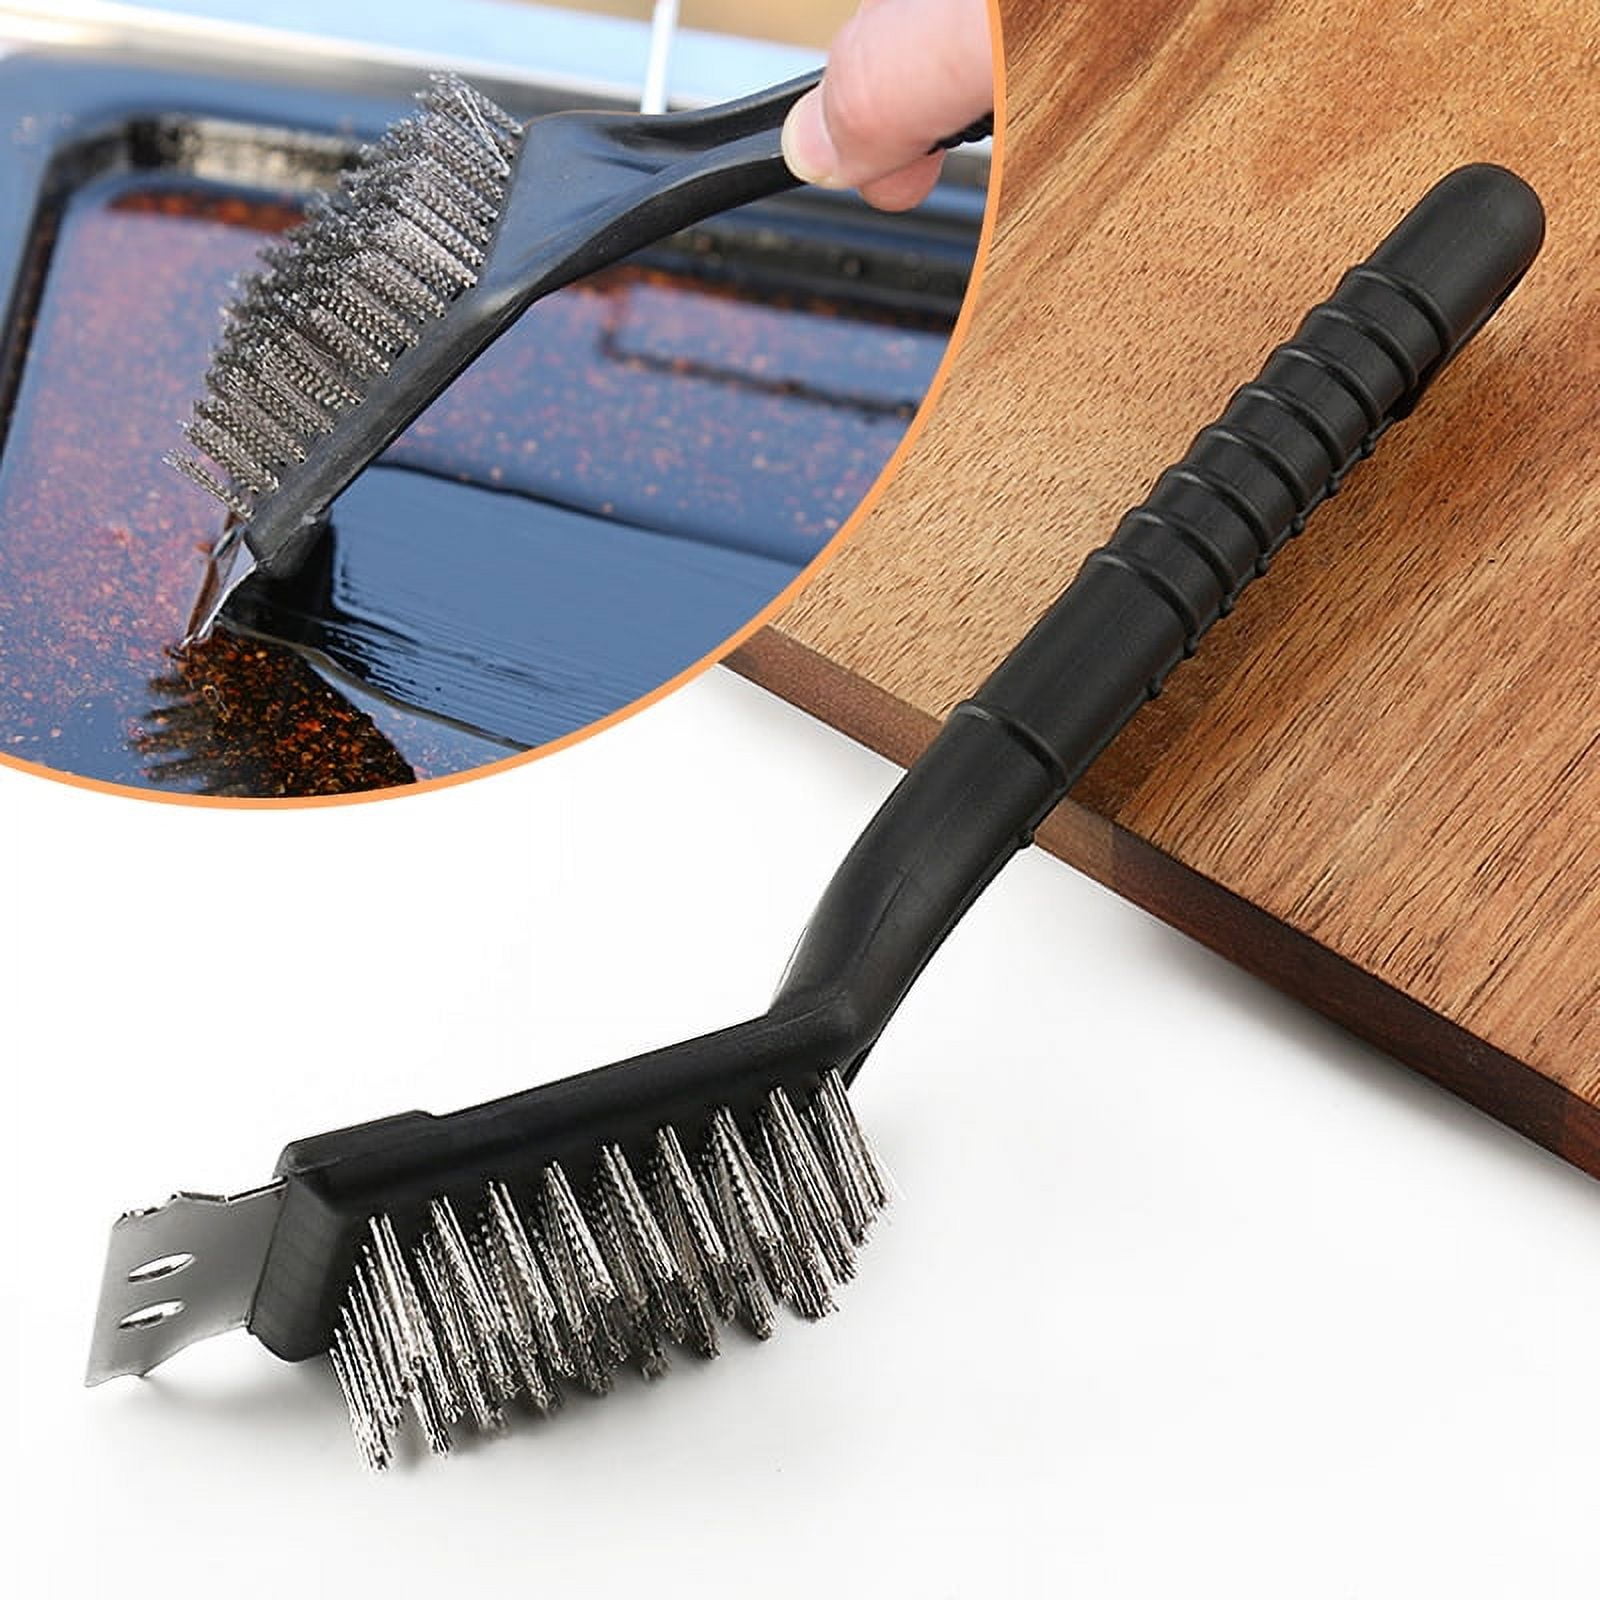  GANAZONO Grill Brushless Cleaning Tool Wire Brush with